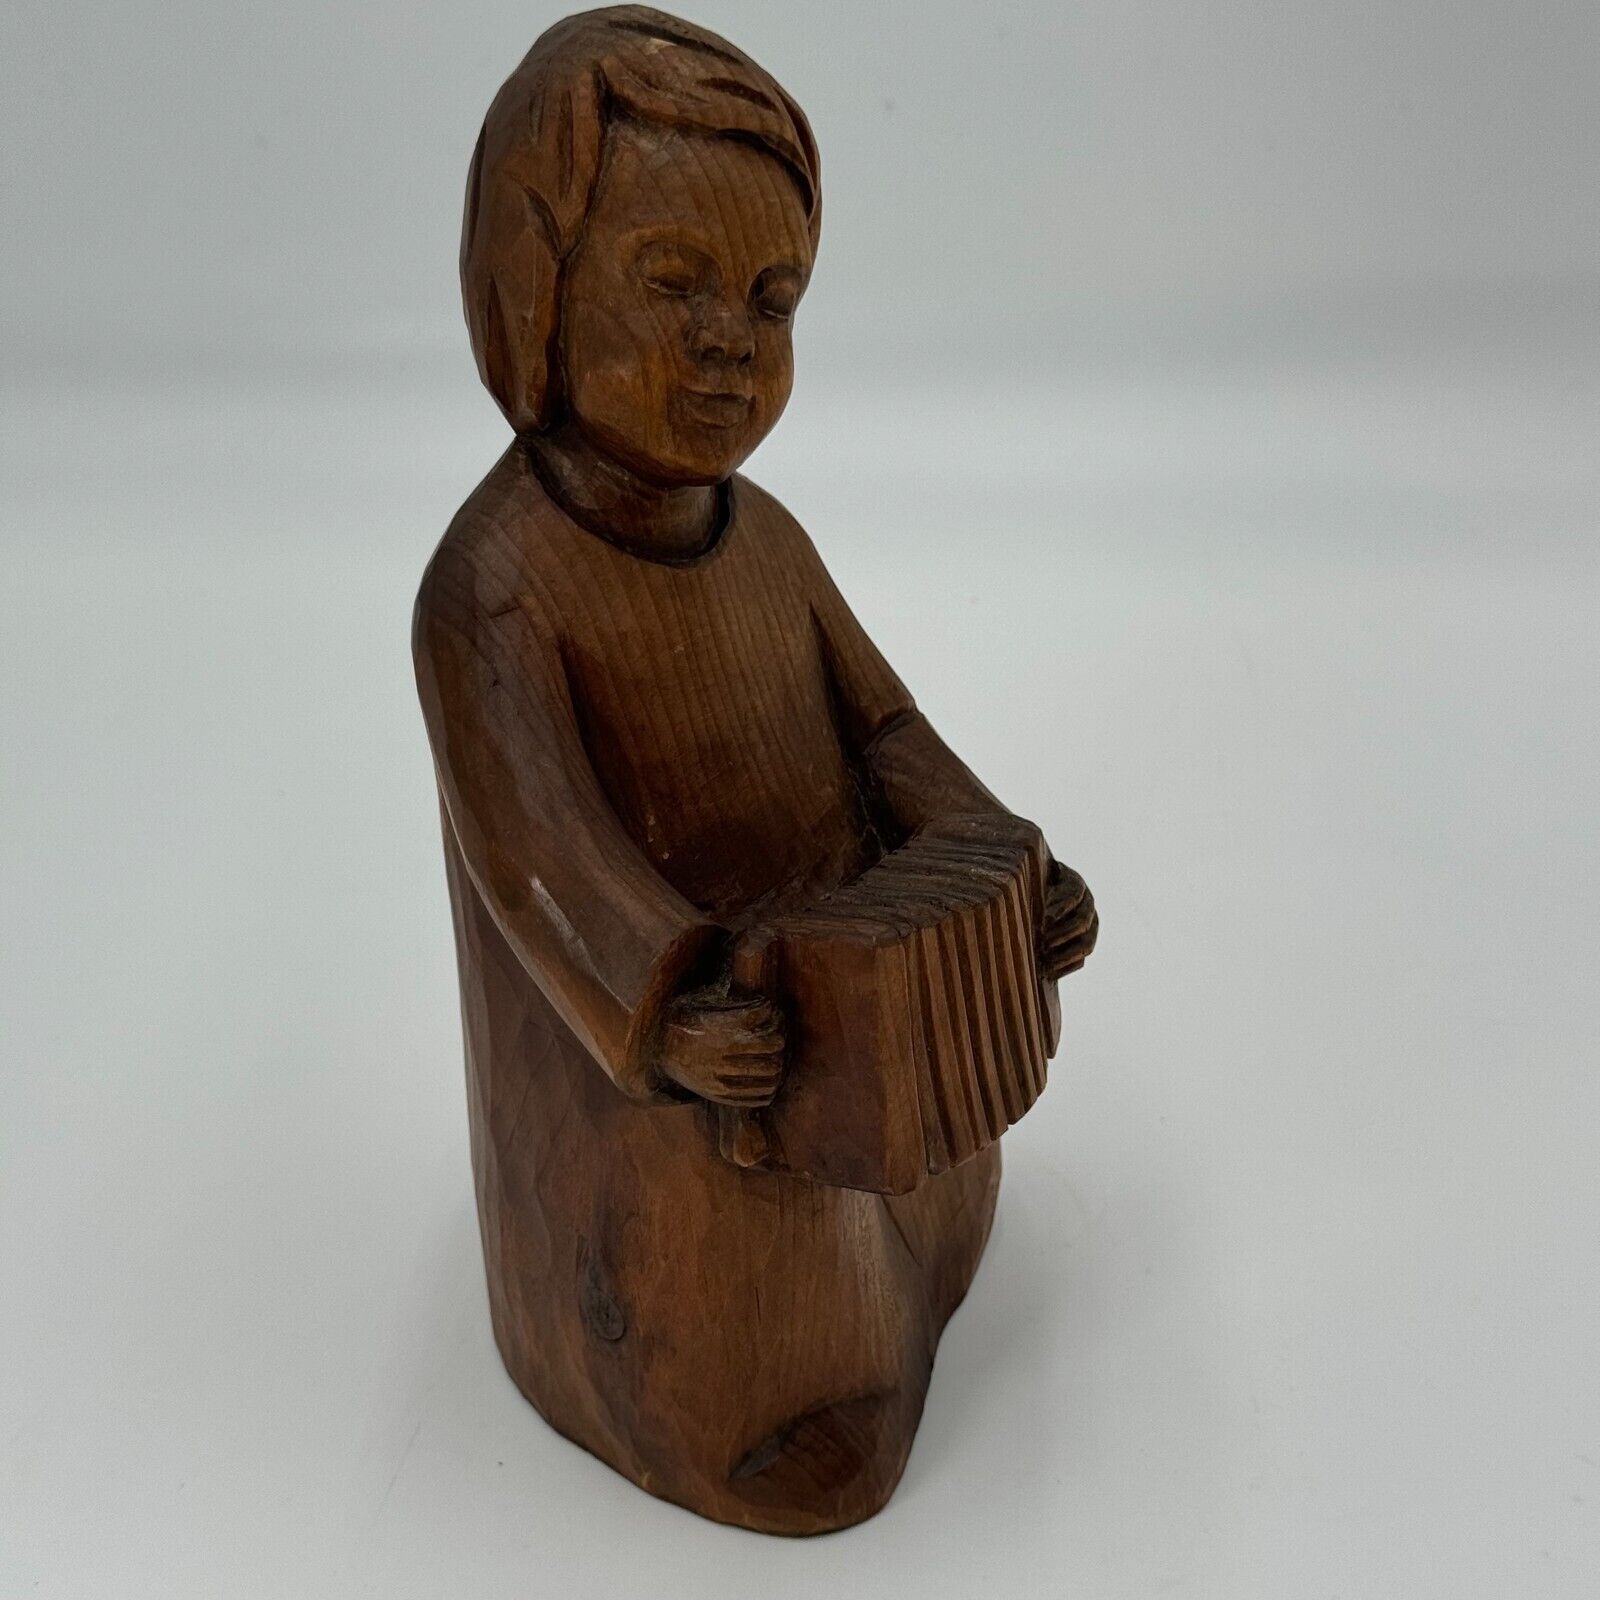 Antique Solid Wood Sculpture Hand Carved Statue Art Boy Playing Accordion Artist